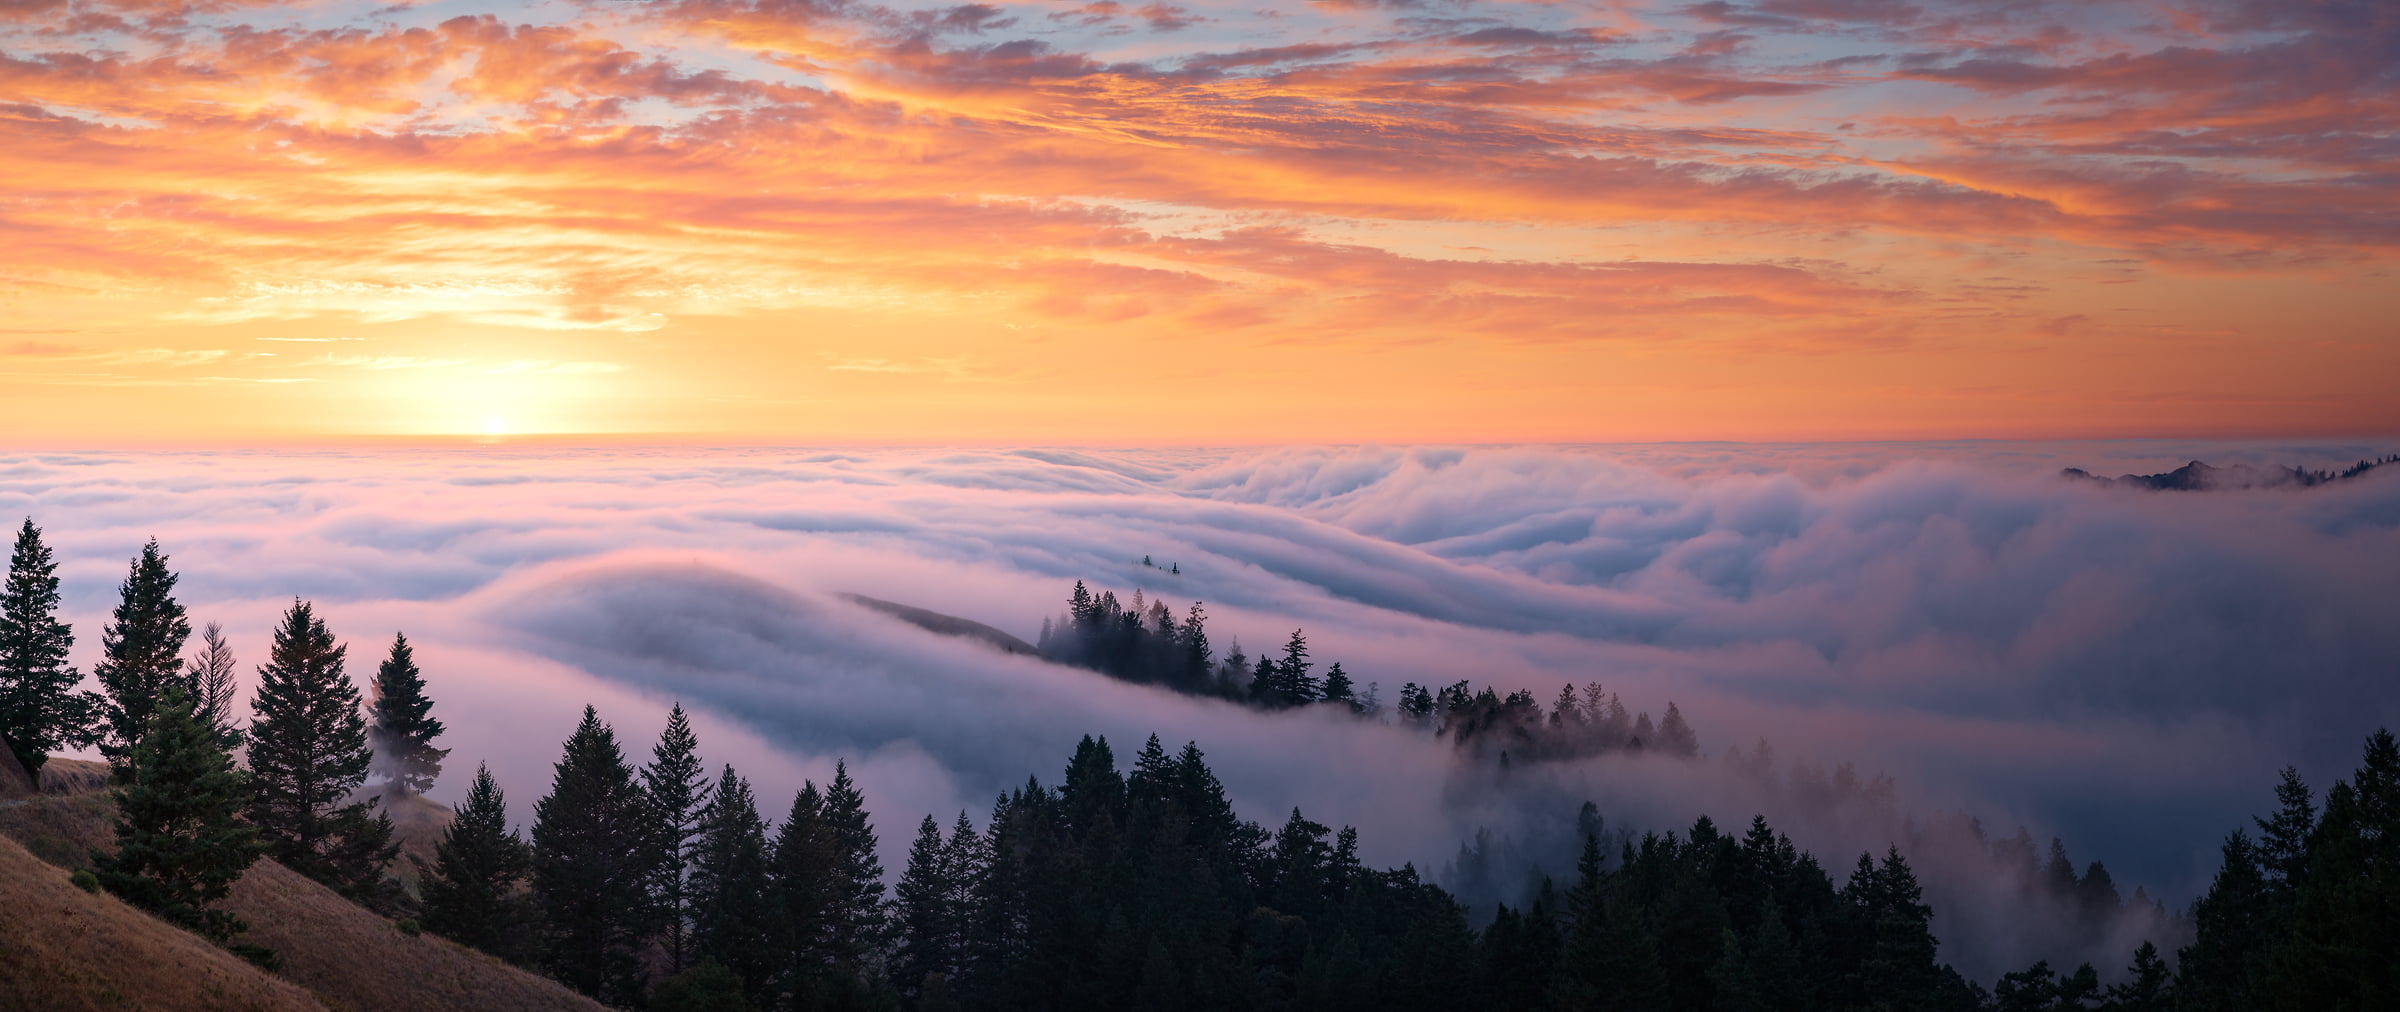 139 megapixels! A very high resolution, large-format VAST photo print of sunset above clouds and fog; landscape photograph created by Jeff Lewis in Mt. Tamalpais, California.